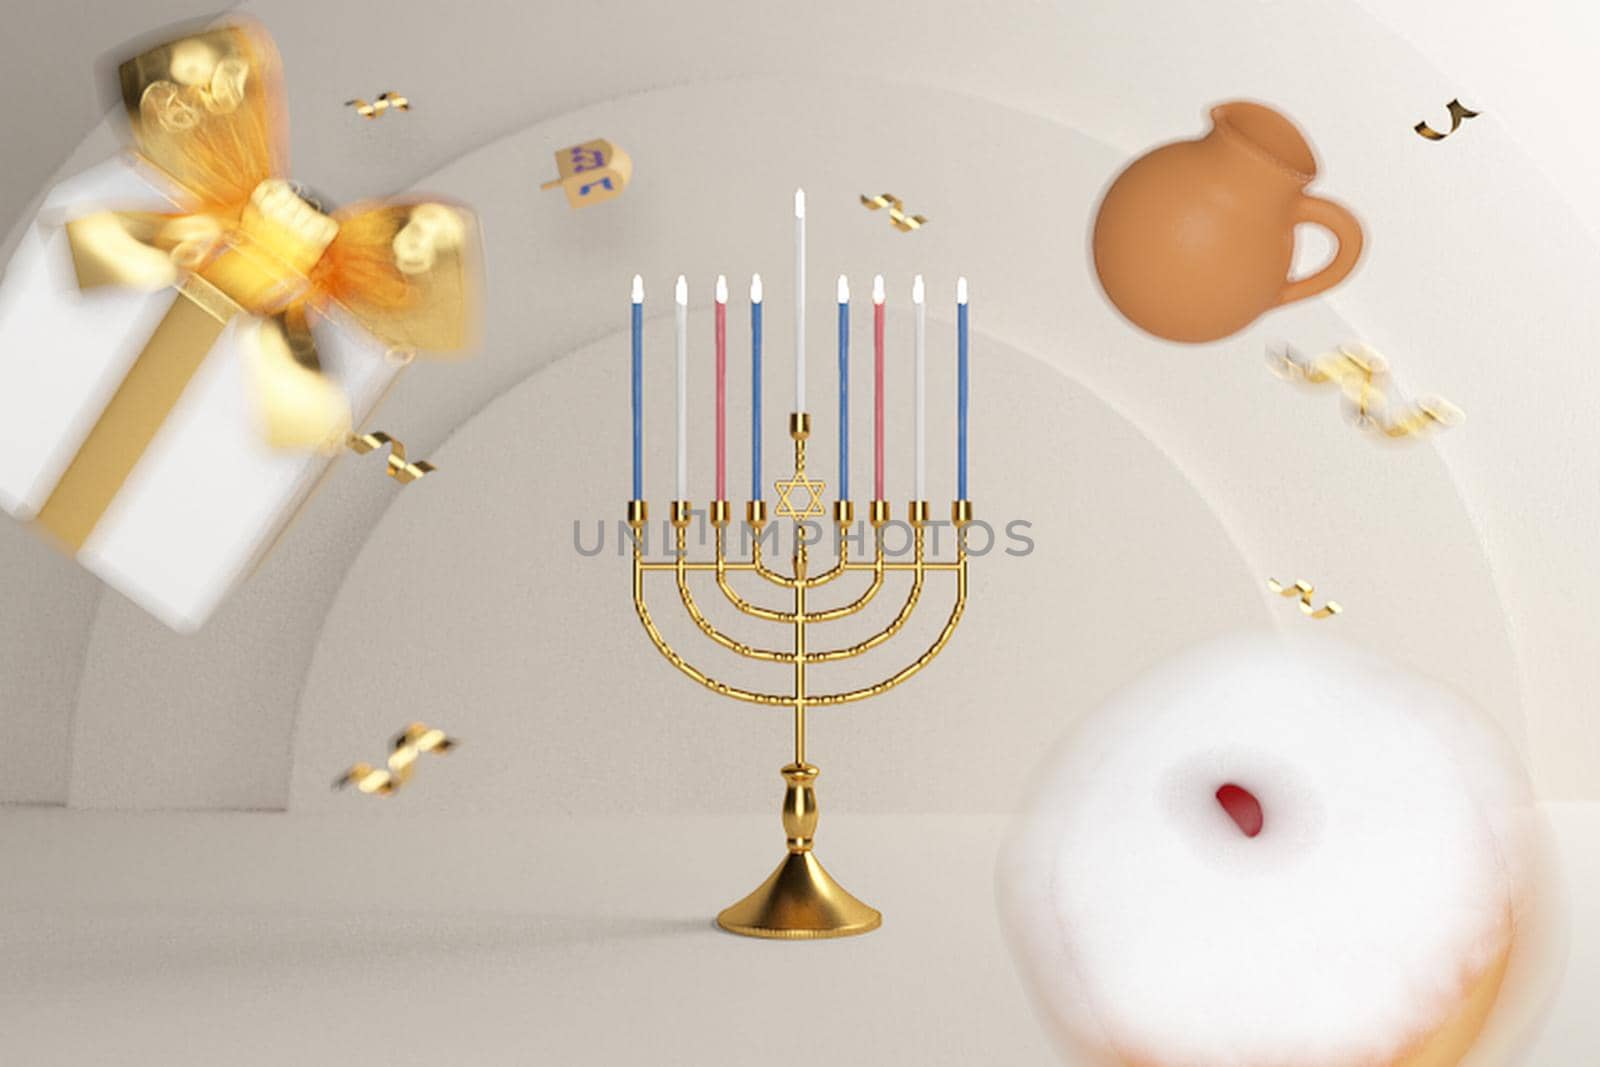 3d rendering Image of Jewish holiday Hanukkah with menorah or traditional Candelabra,gif box, jar ,gold coin and wooden dreidels or spinning top on a  white background.